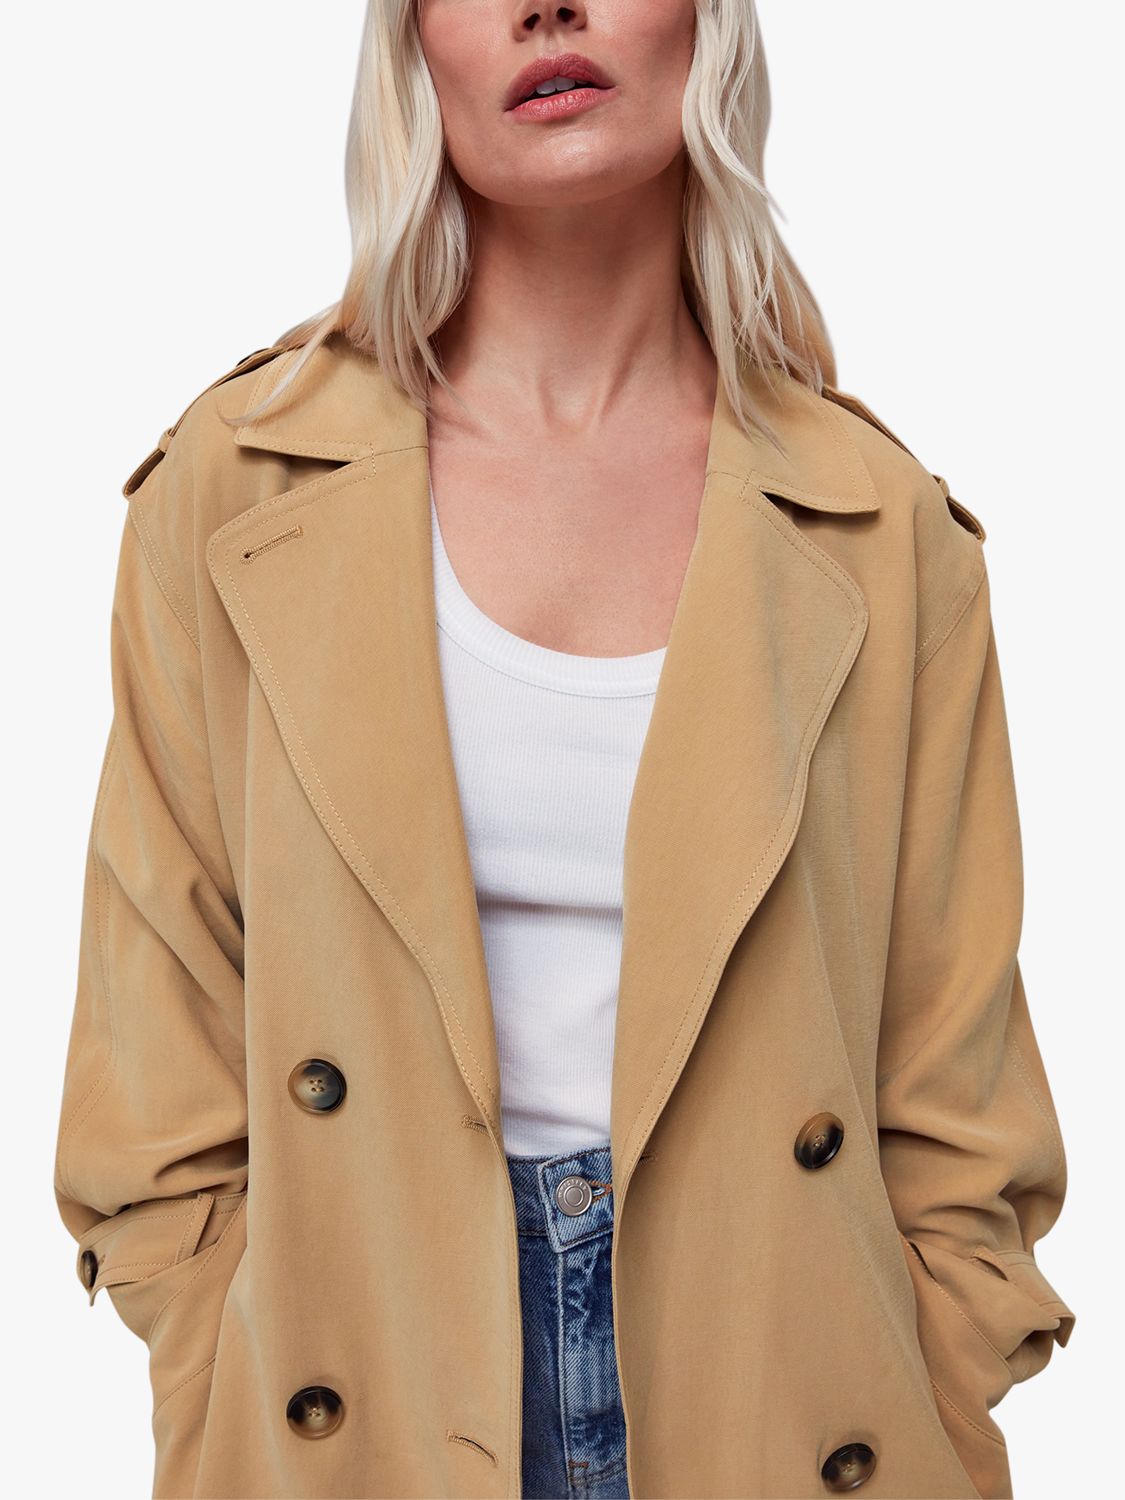 Whistles Petite Riley Double Breasted Trench Coat, Beige, 6